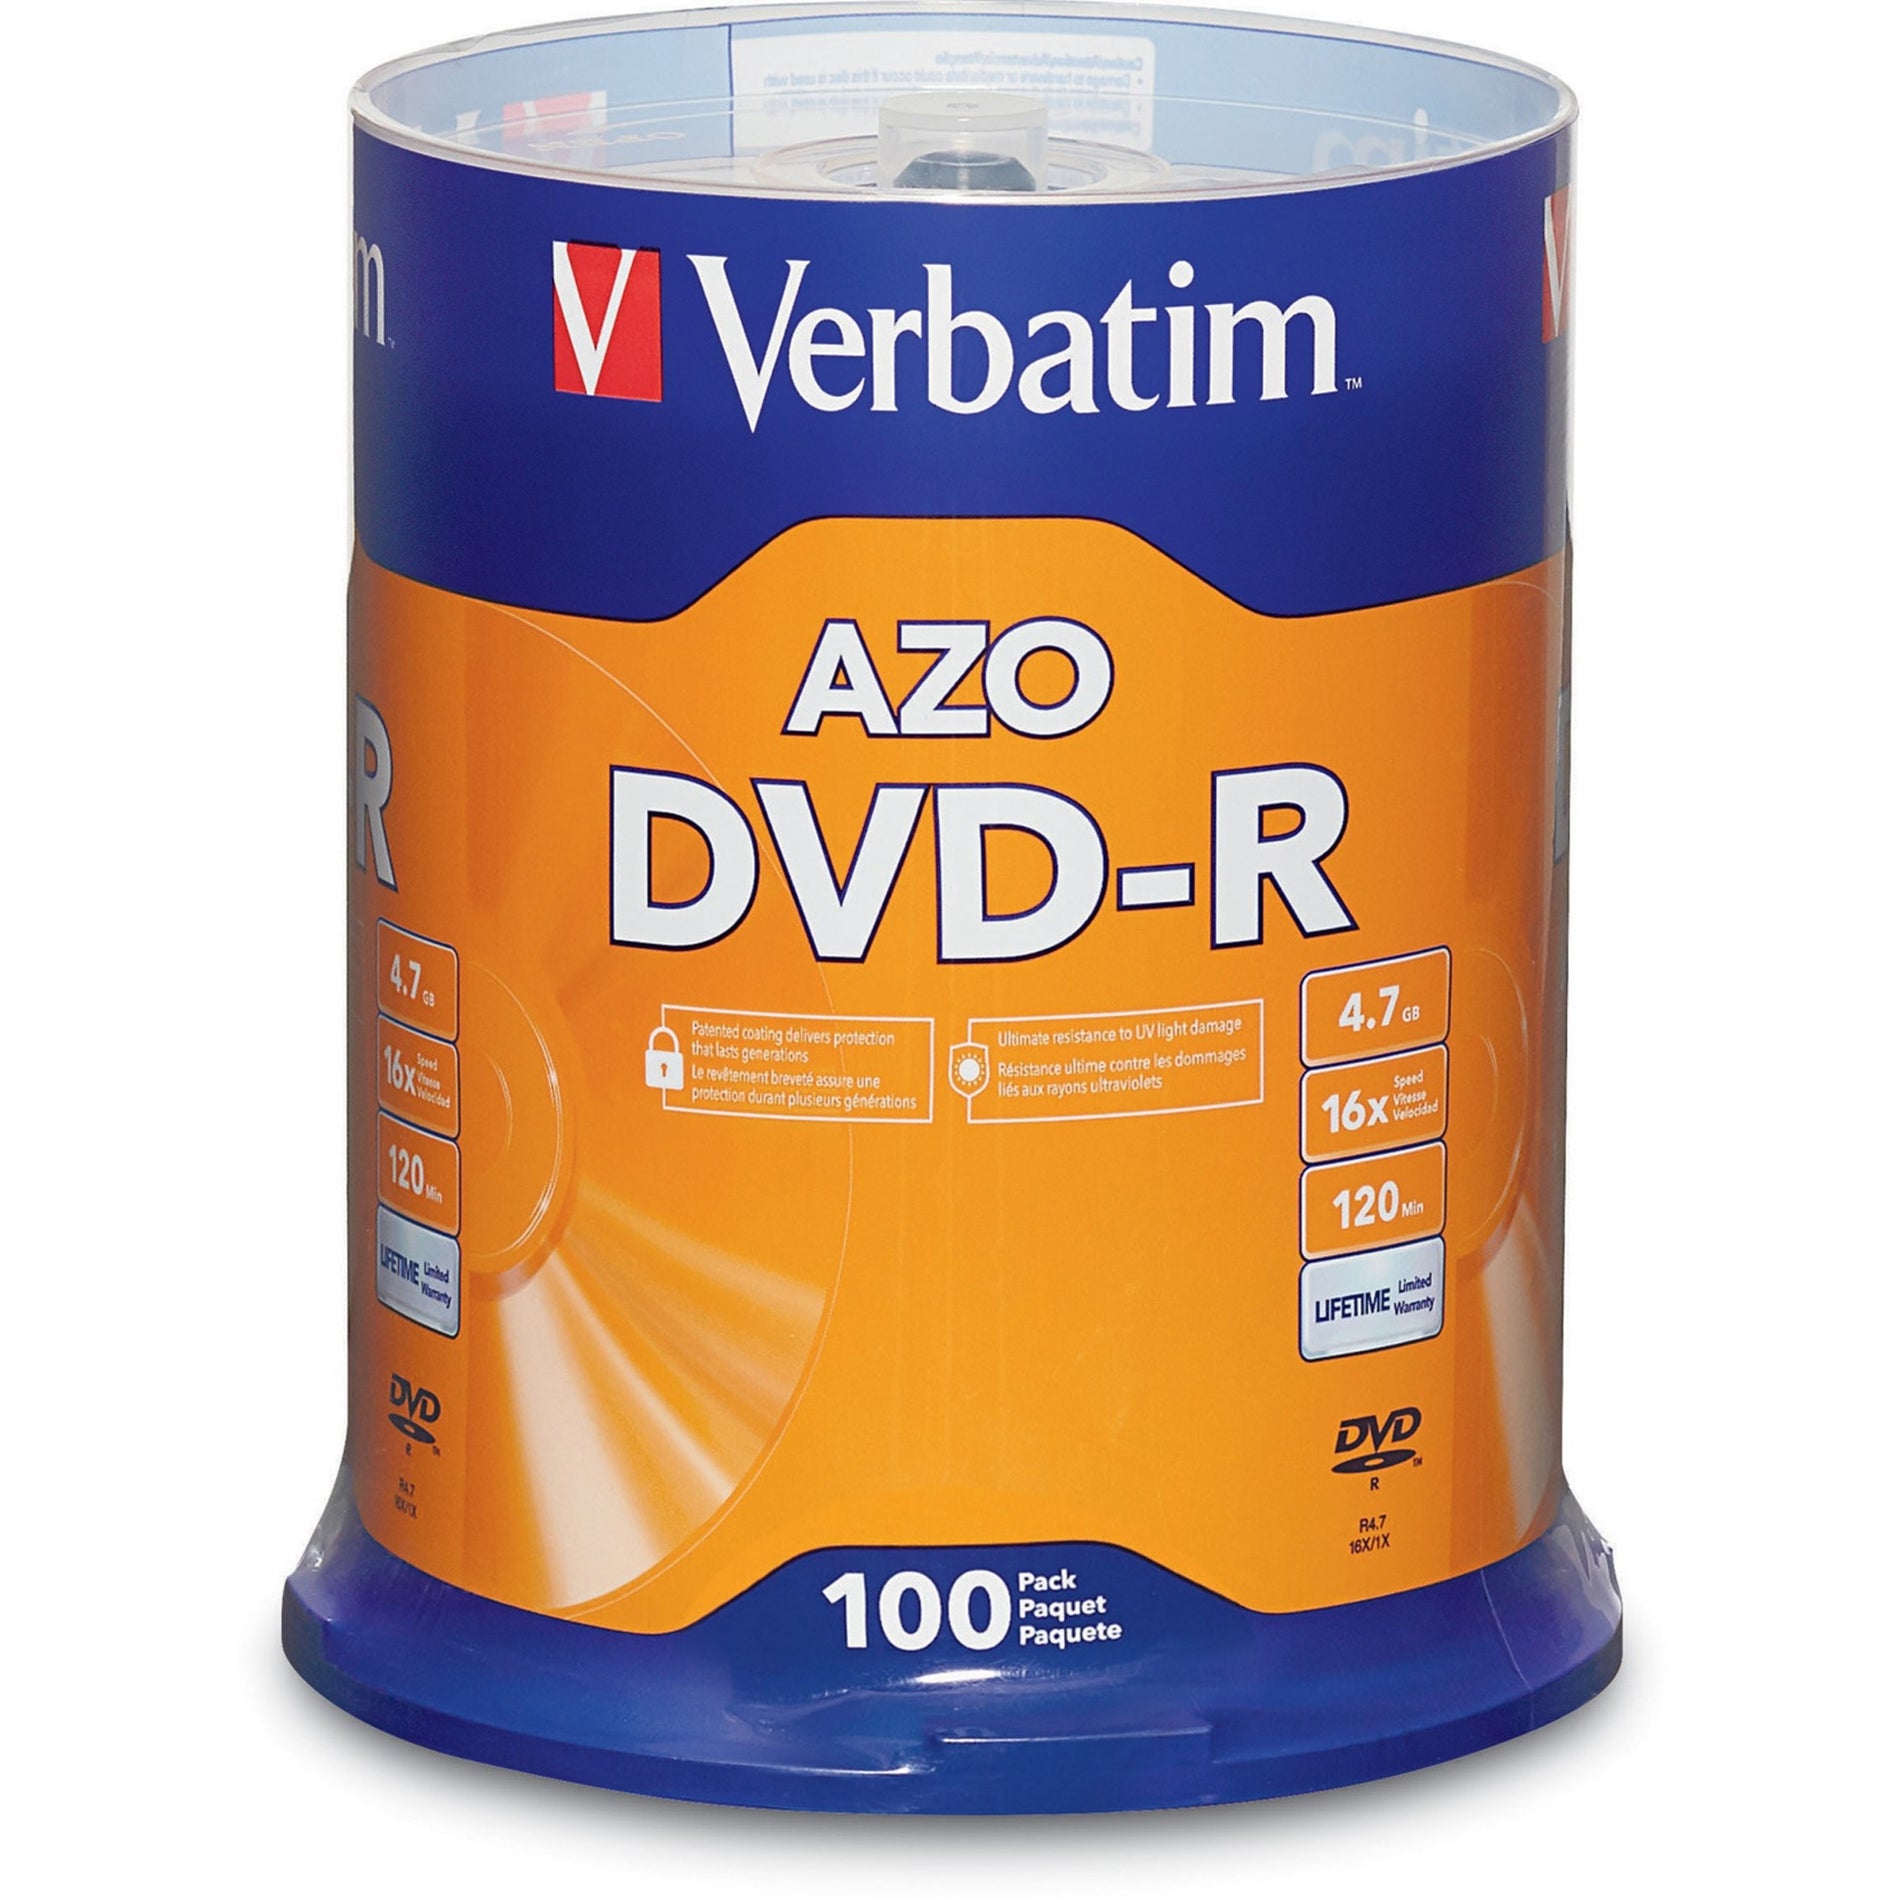 Verbatim 95102 AZO DVD-R 4.7GB 16X with Branded Surface - 100pk Spindle, 120 Minutes